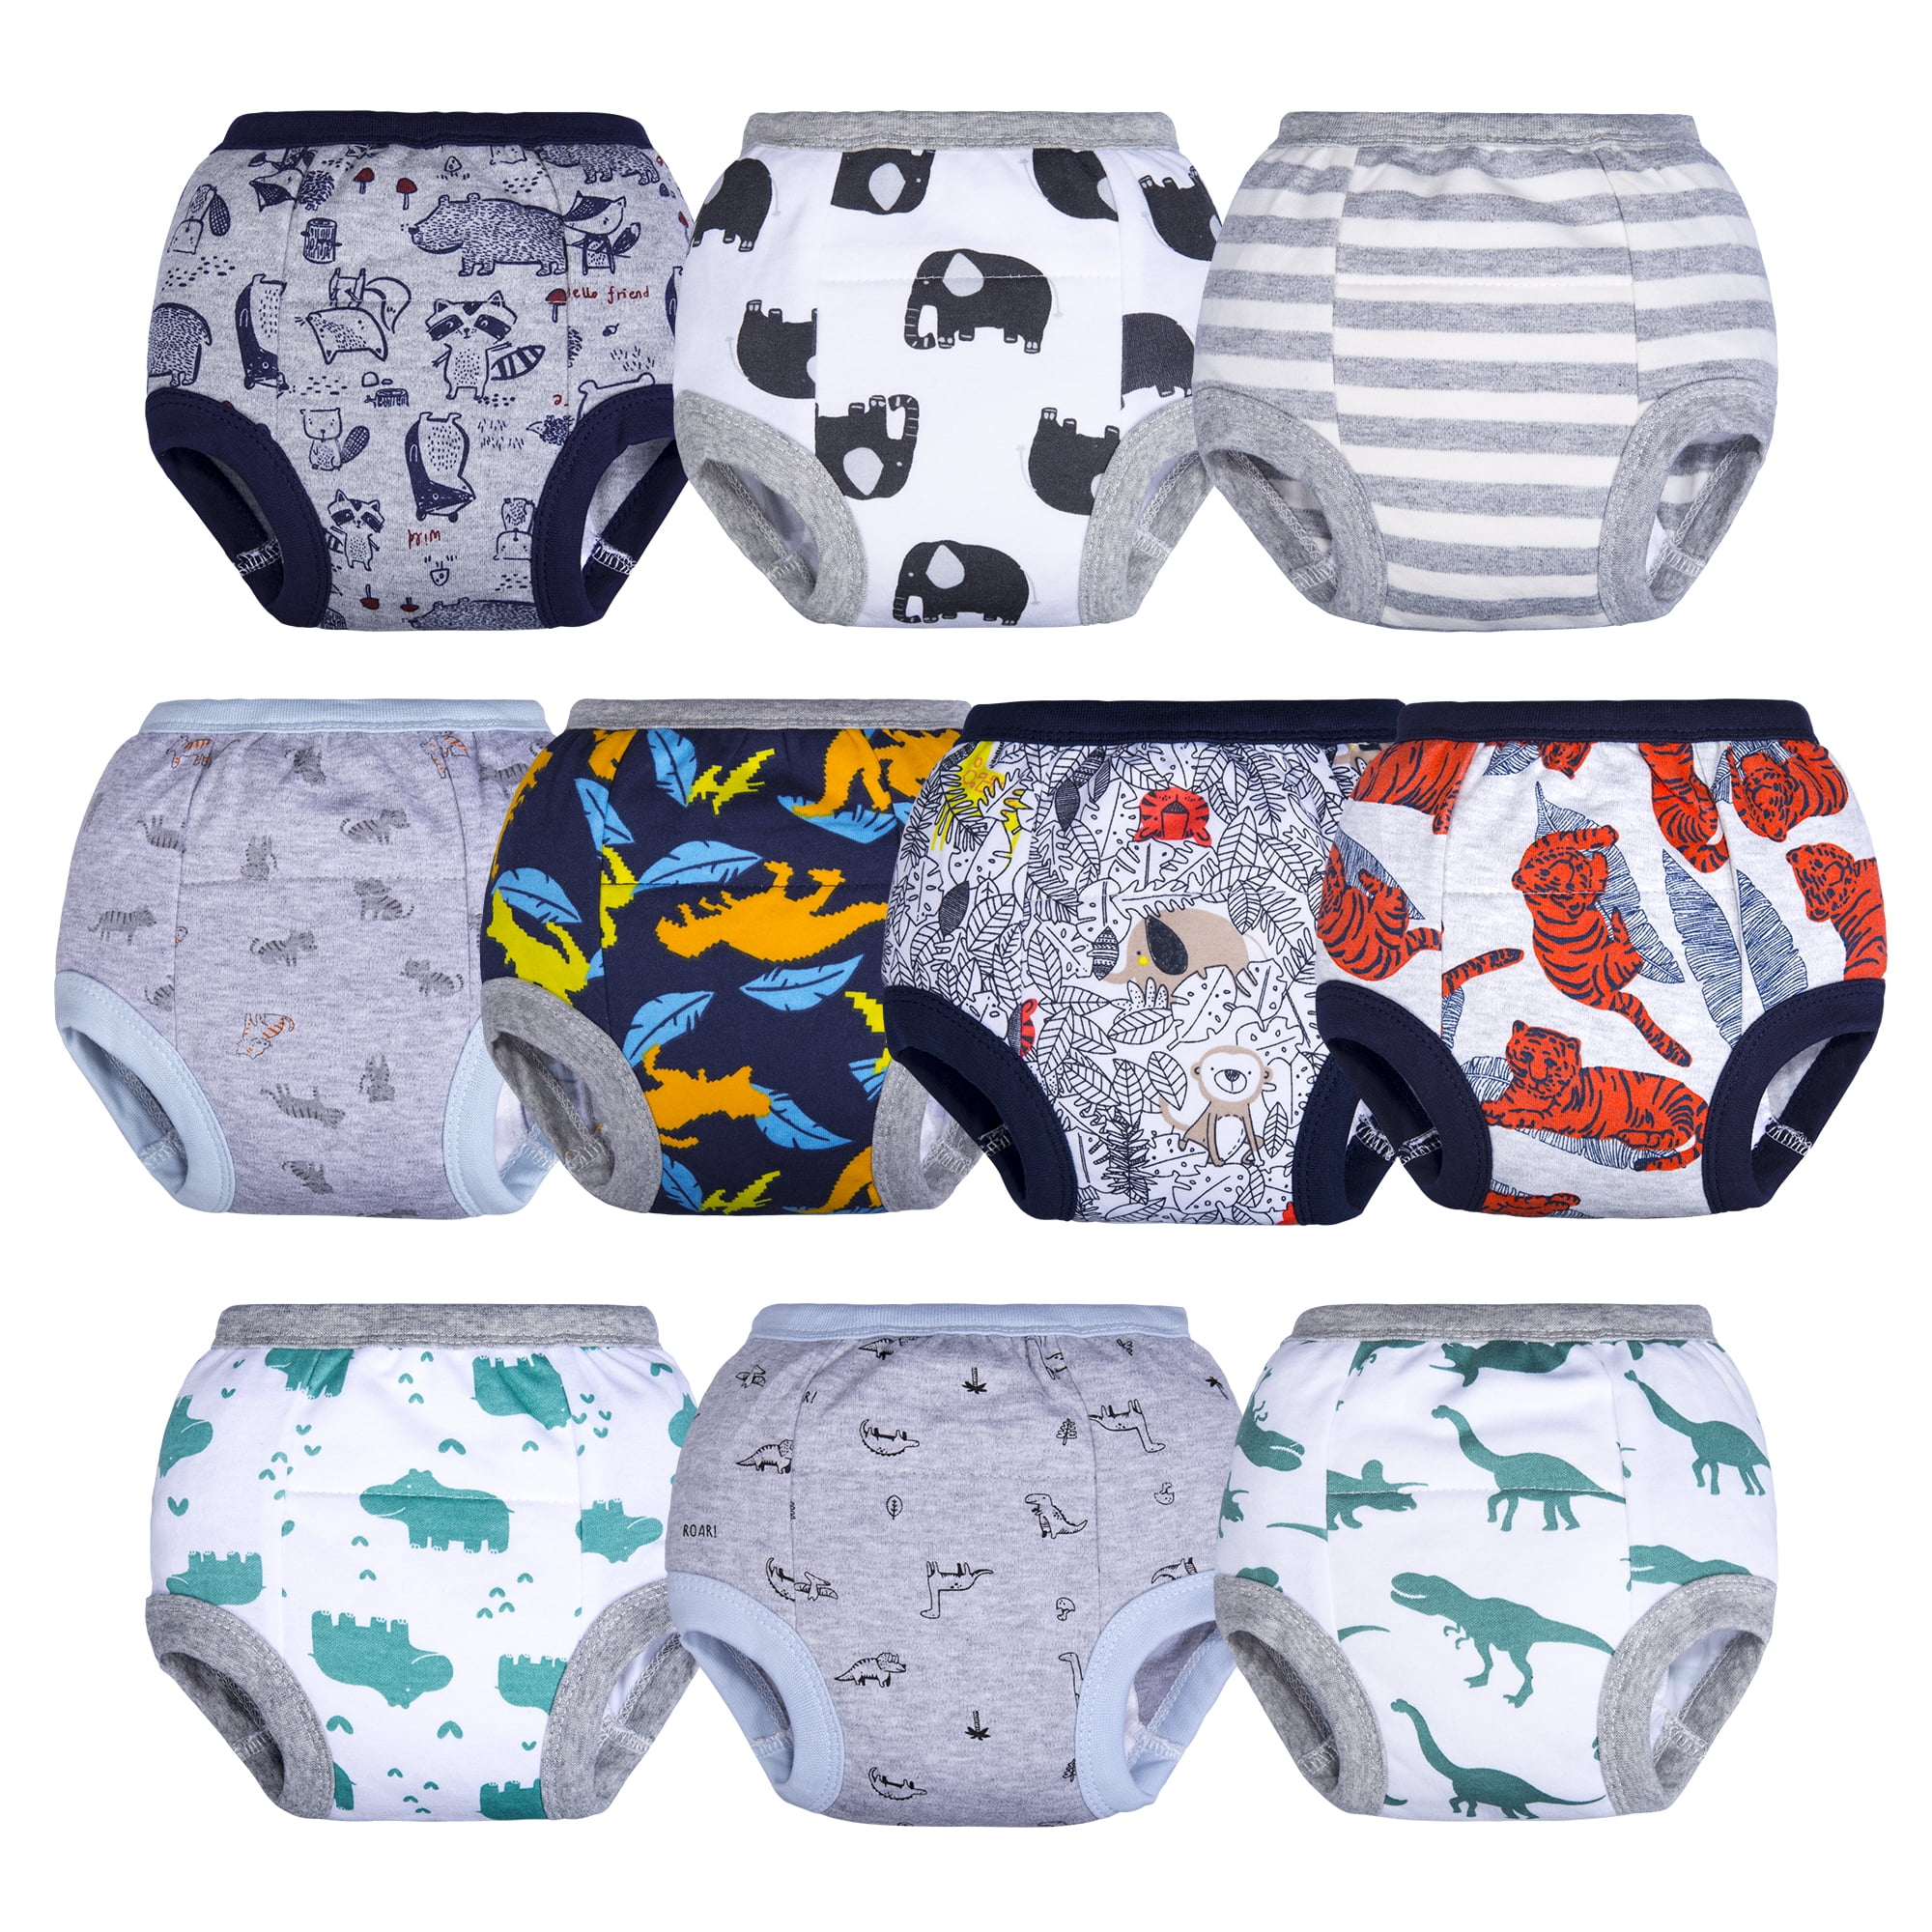 Mickey Mouse Toddler Boy Training Underwear, 7-Pack, Sizes 18M-4T